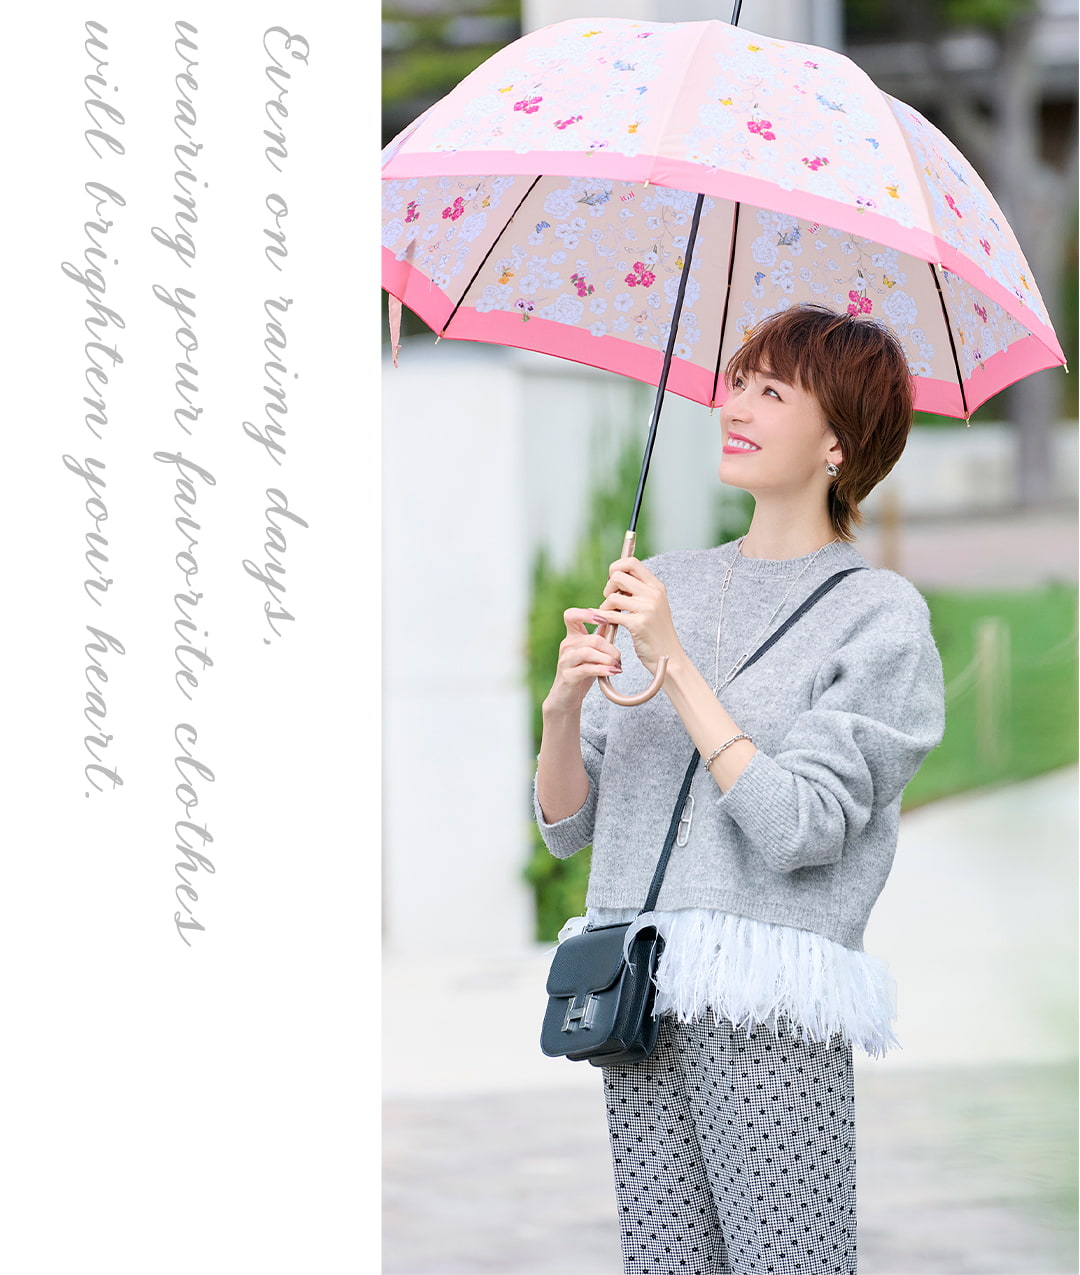 Ever on vainy days, wearing your favorite clothes will brighten your heart.｜Chesty着用イメージ